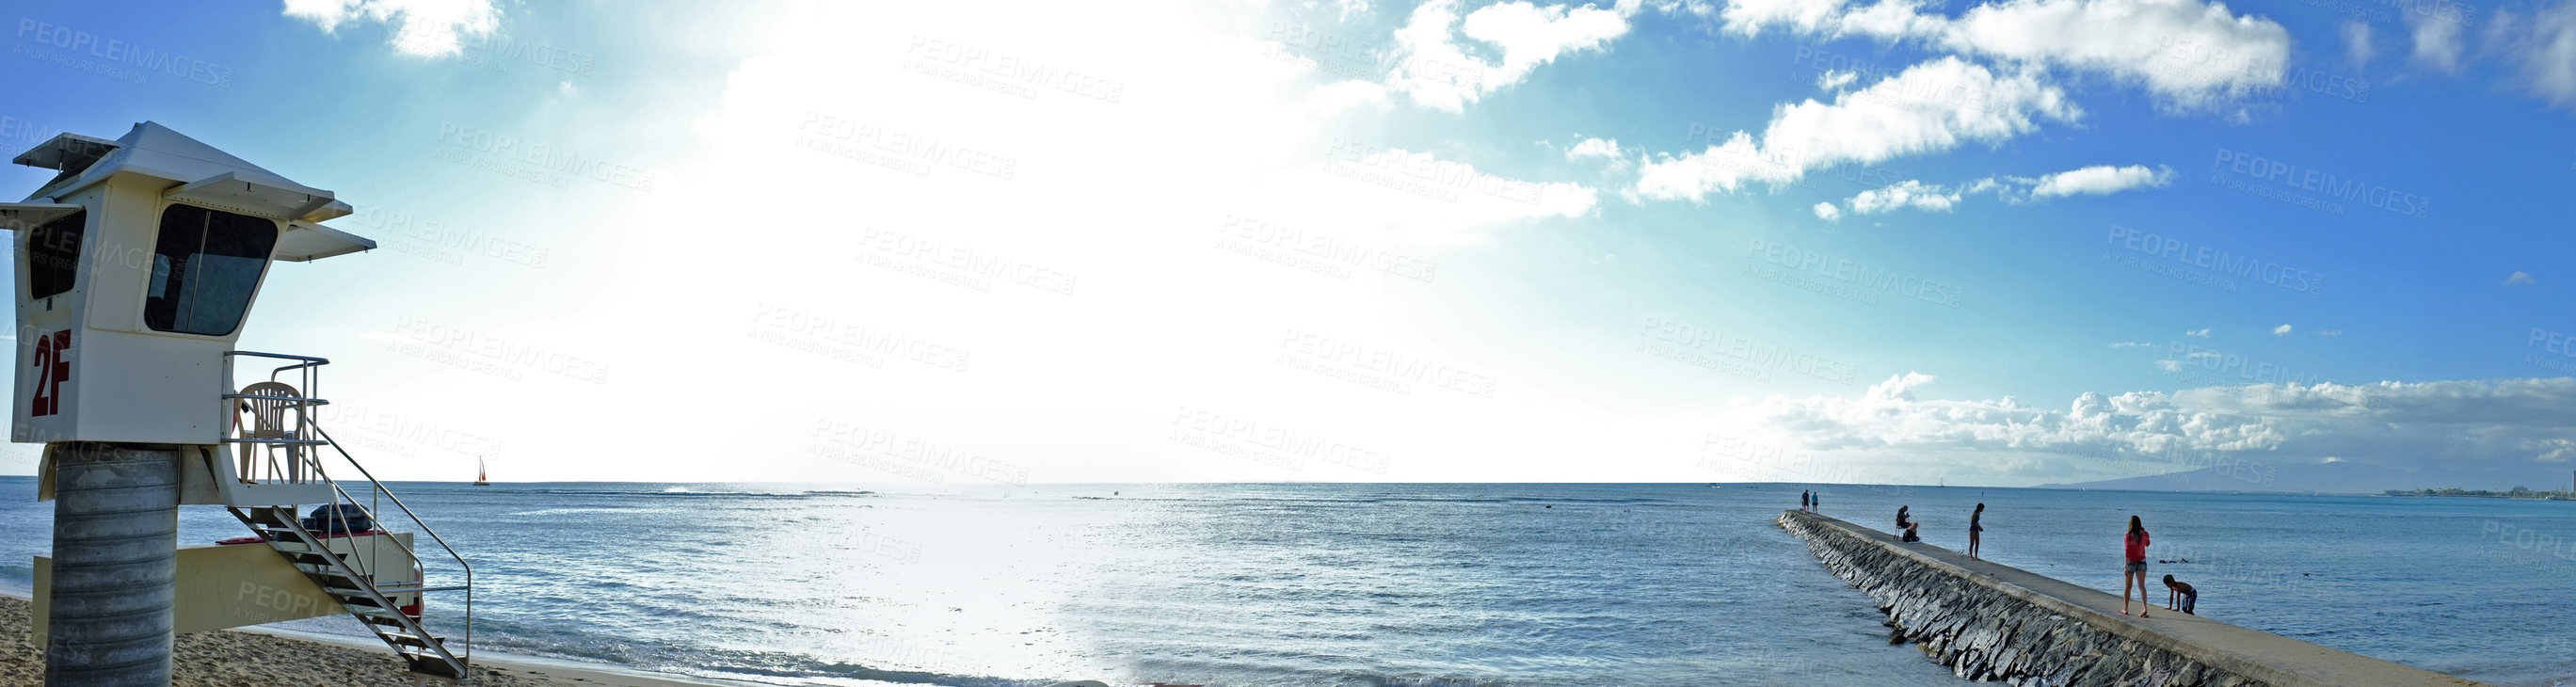 Buy stock photo Ocean, blue sky and people at beach for adventure, sunshine and travel on natural background or landscape. Sea, fresh air and clouds with calm water, vacation destination or location for tourism